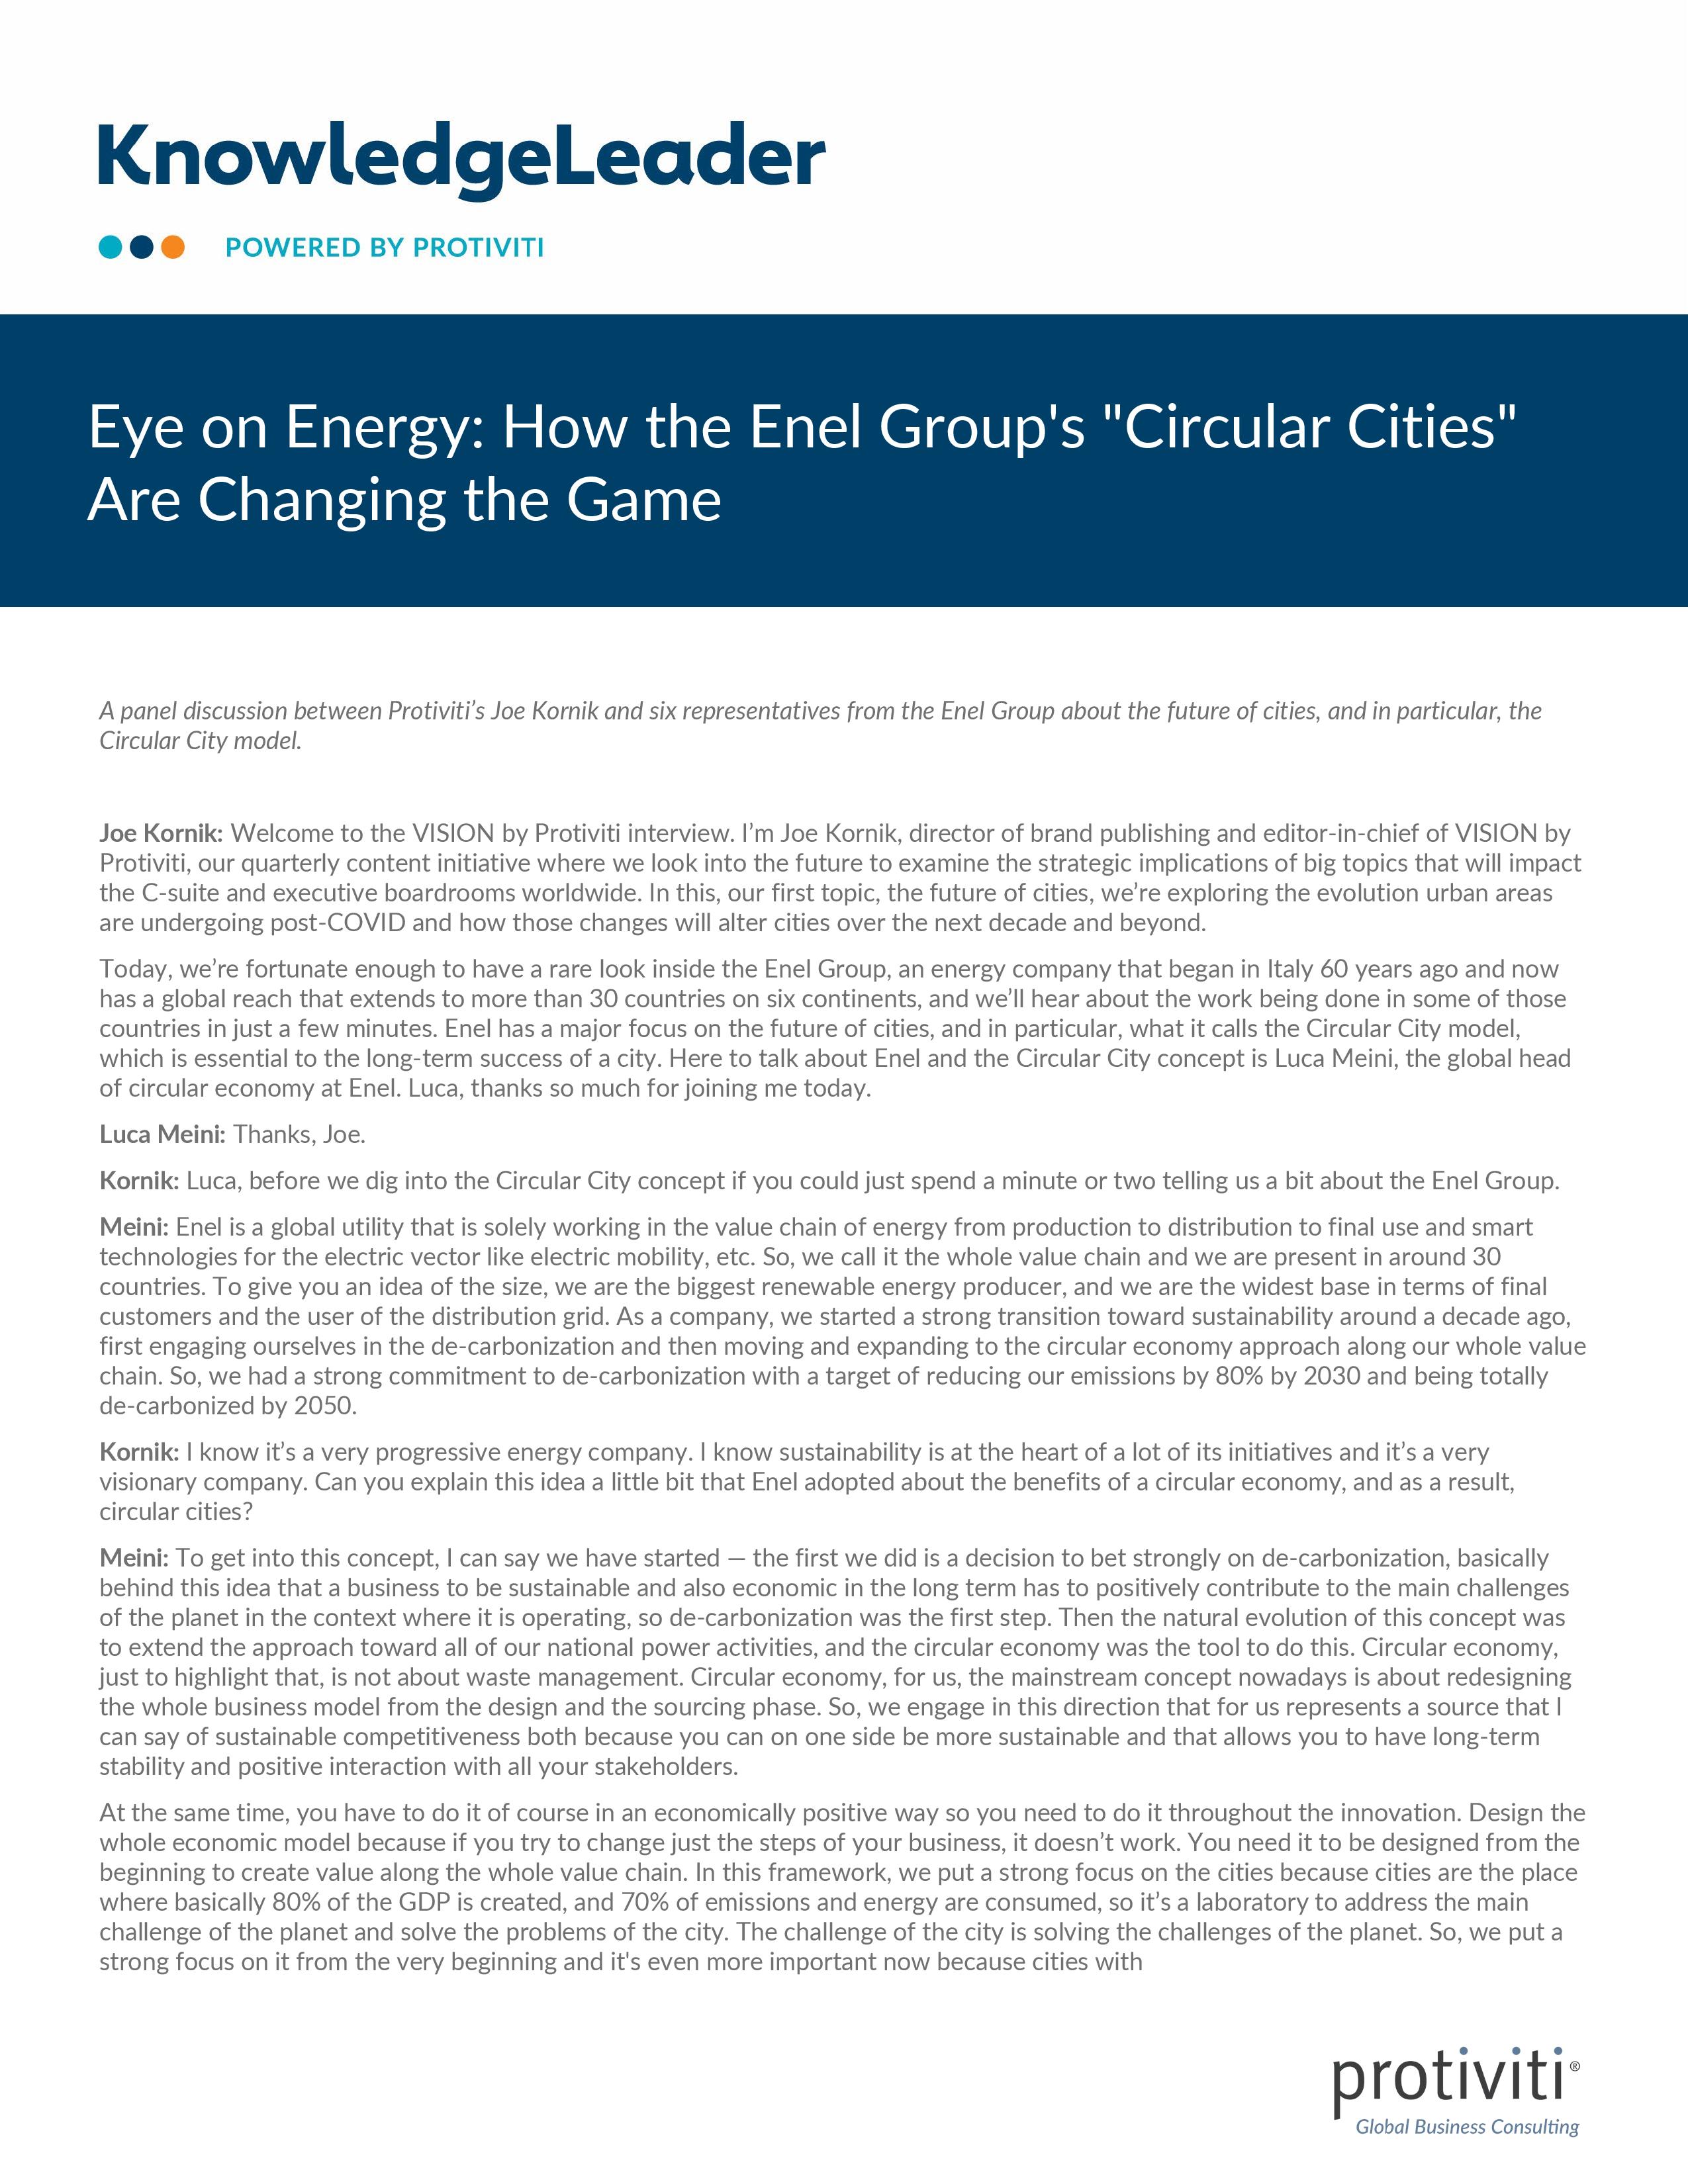 Eye on Energy: How the Enel Group's Circular Cities Are Changing the Game